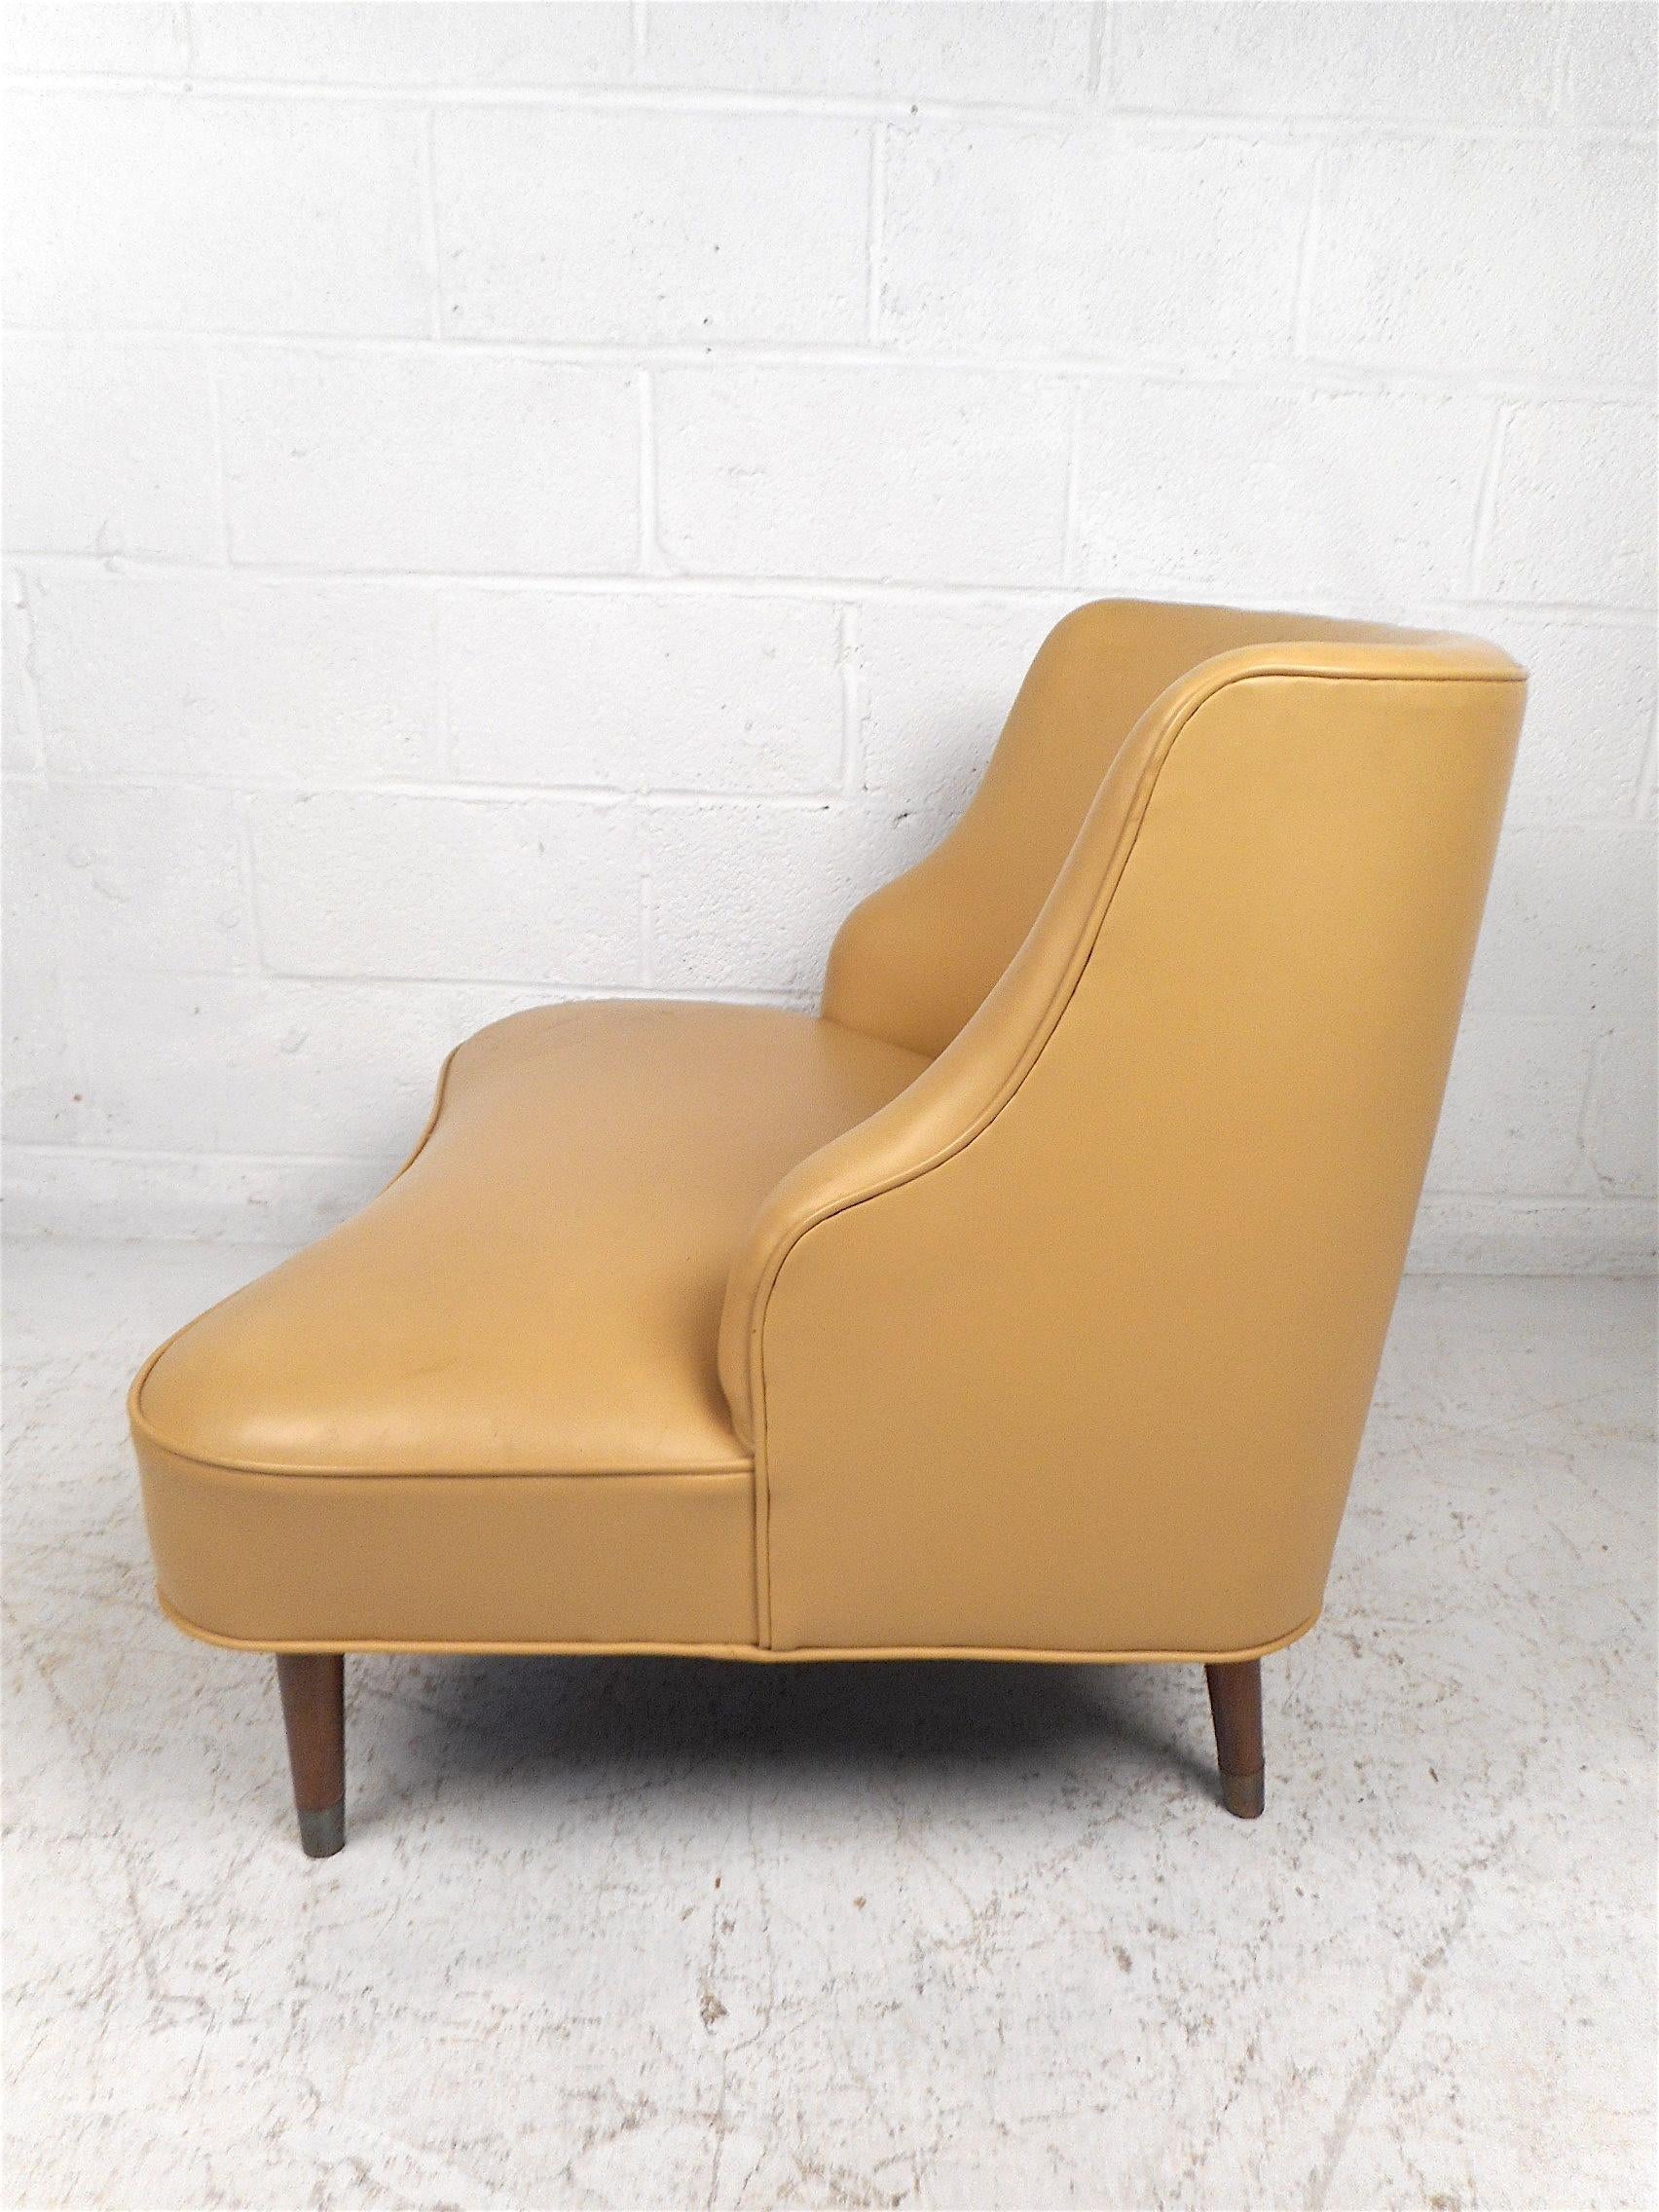 Mid-Century Modern Vinyl Lounge Chair In Good Condition For Sale In Brooklyn, NY